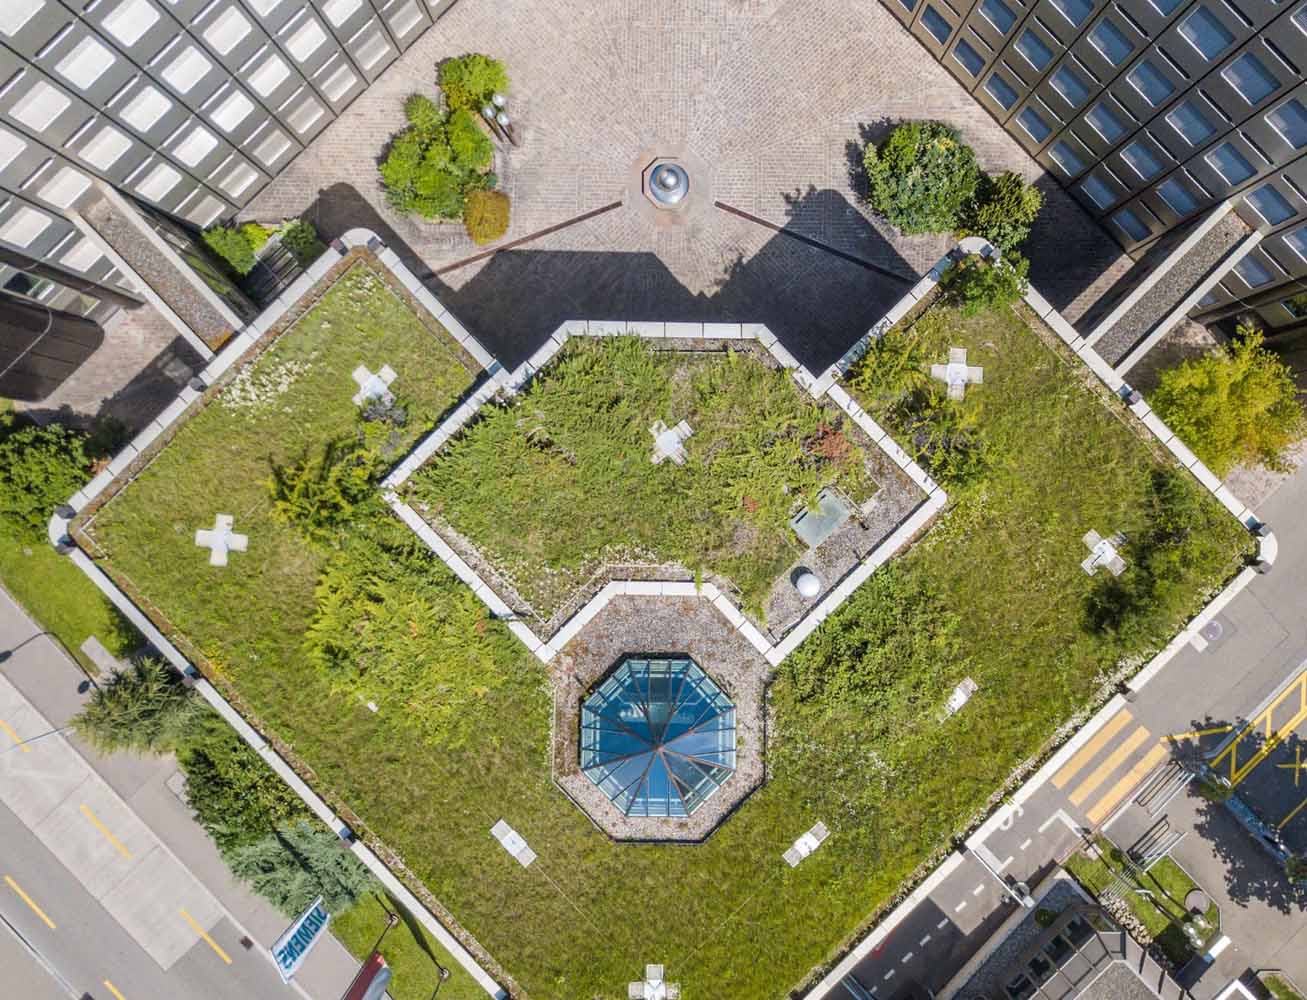 Aerial view of rooftop garden, or a living roof, in urban residential area